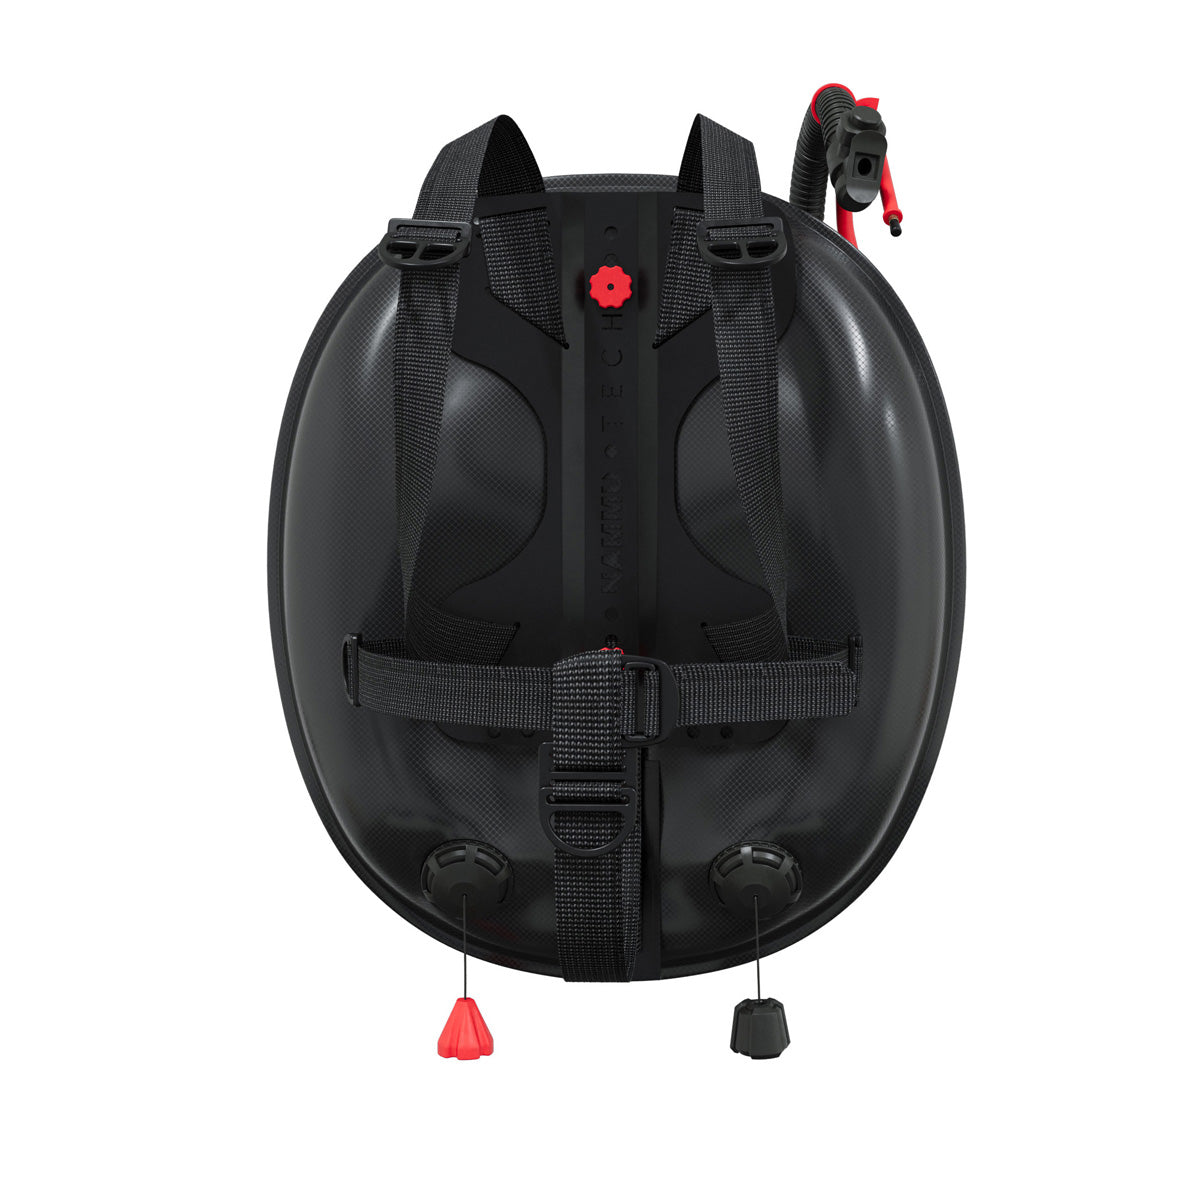 Leviathan Backmount Diving Harness